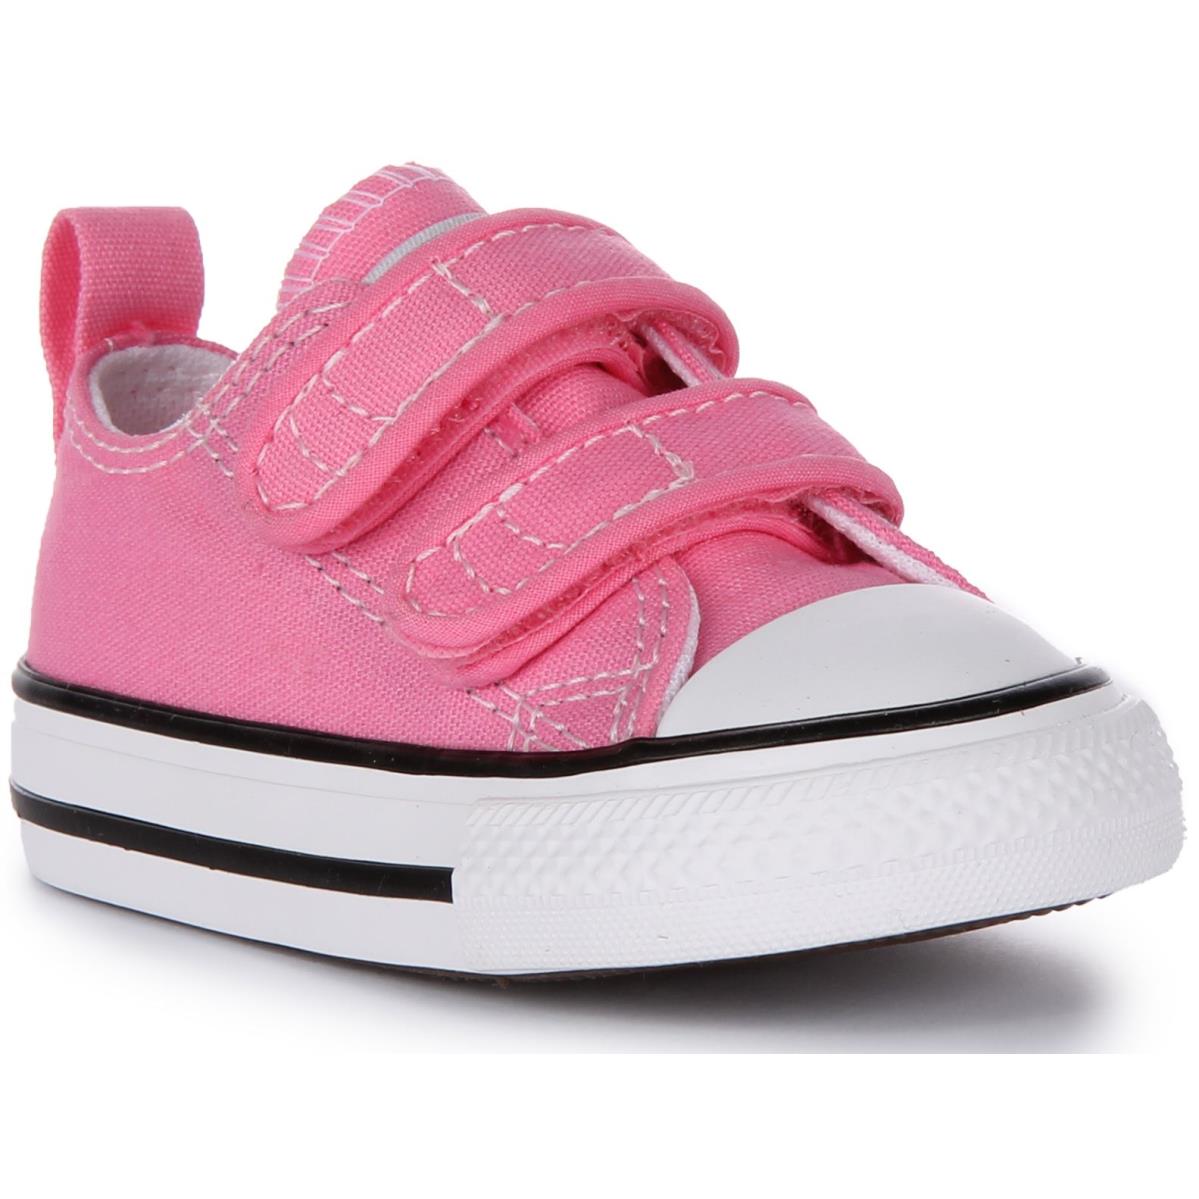 Converse 709447C Chuck Taylor All Star Easy On Shoe Pink Infants US 0.5C - 13.5C PINK